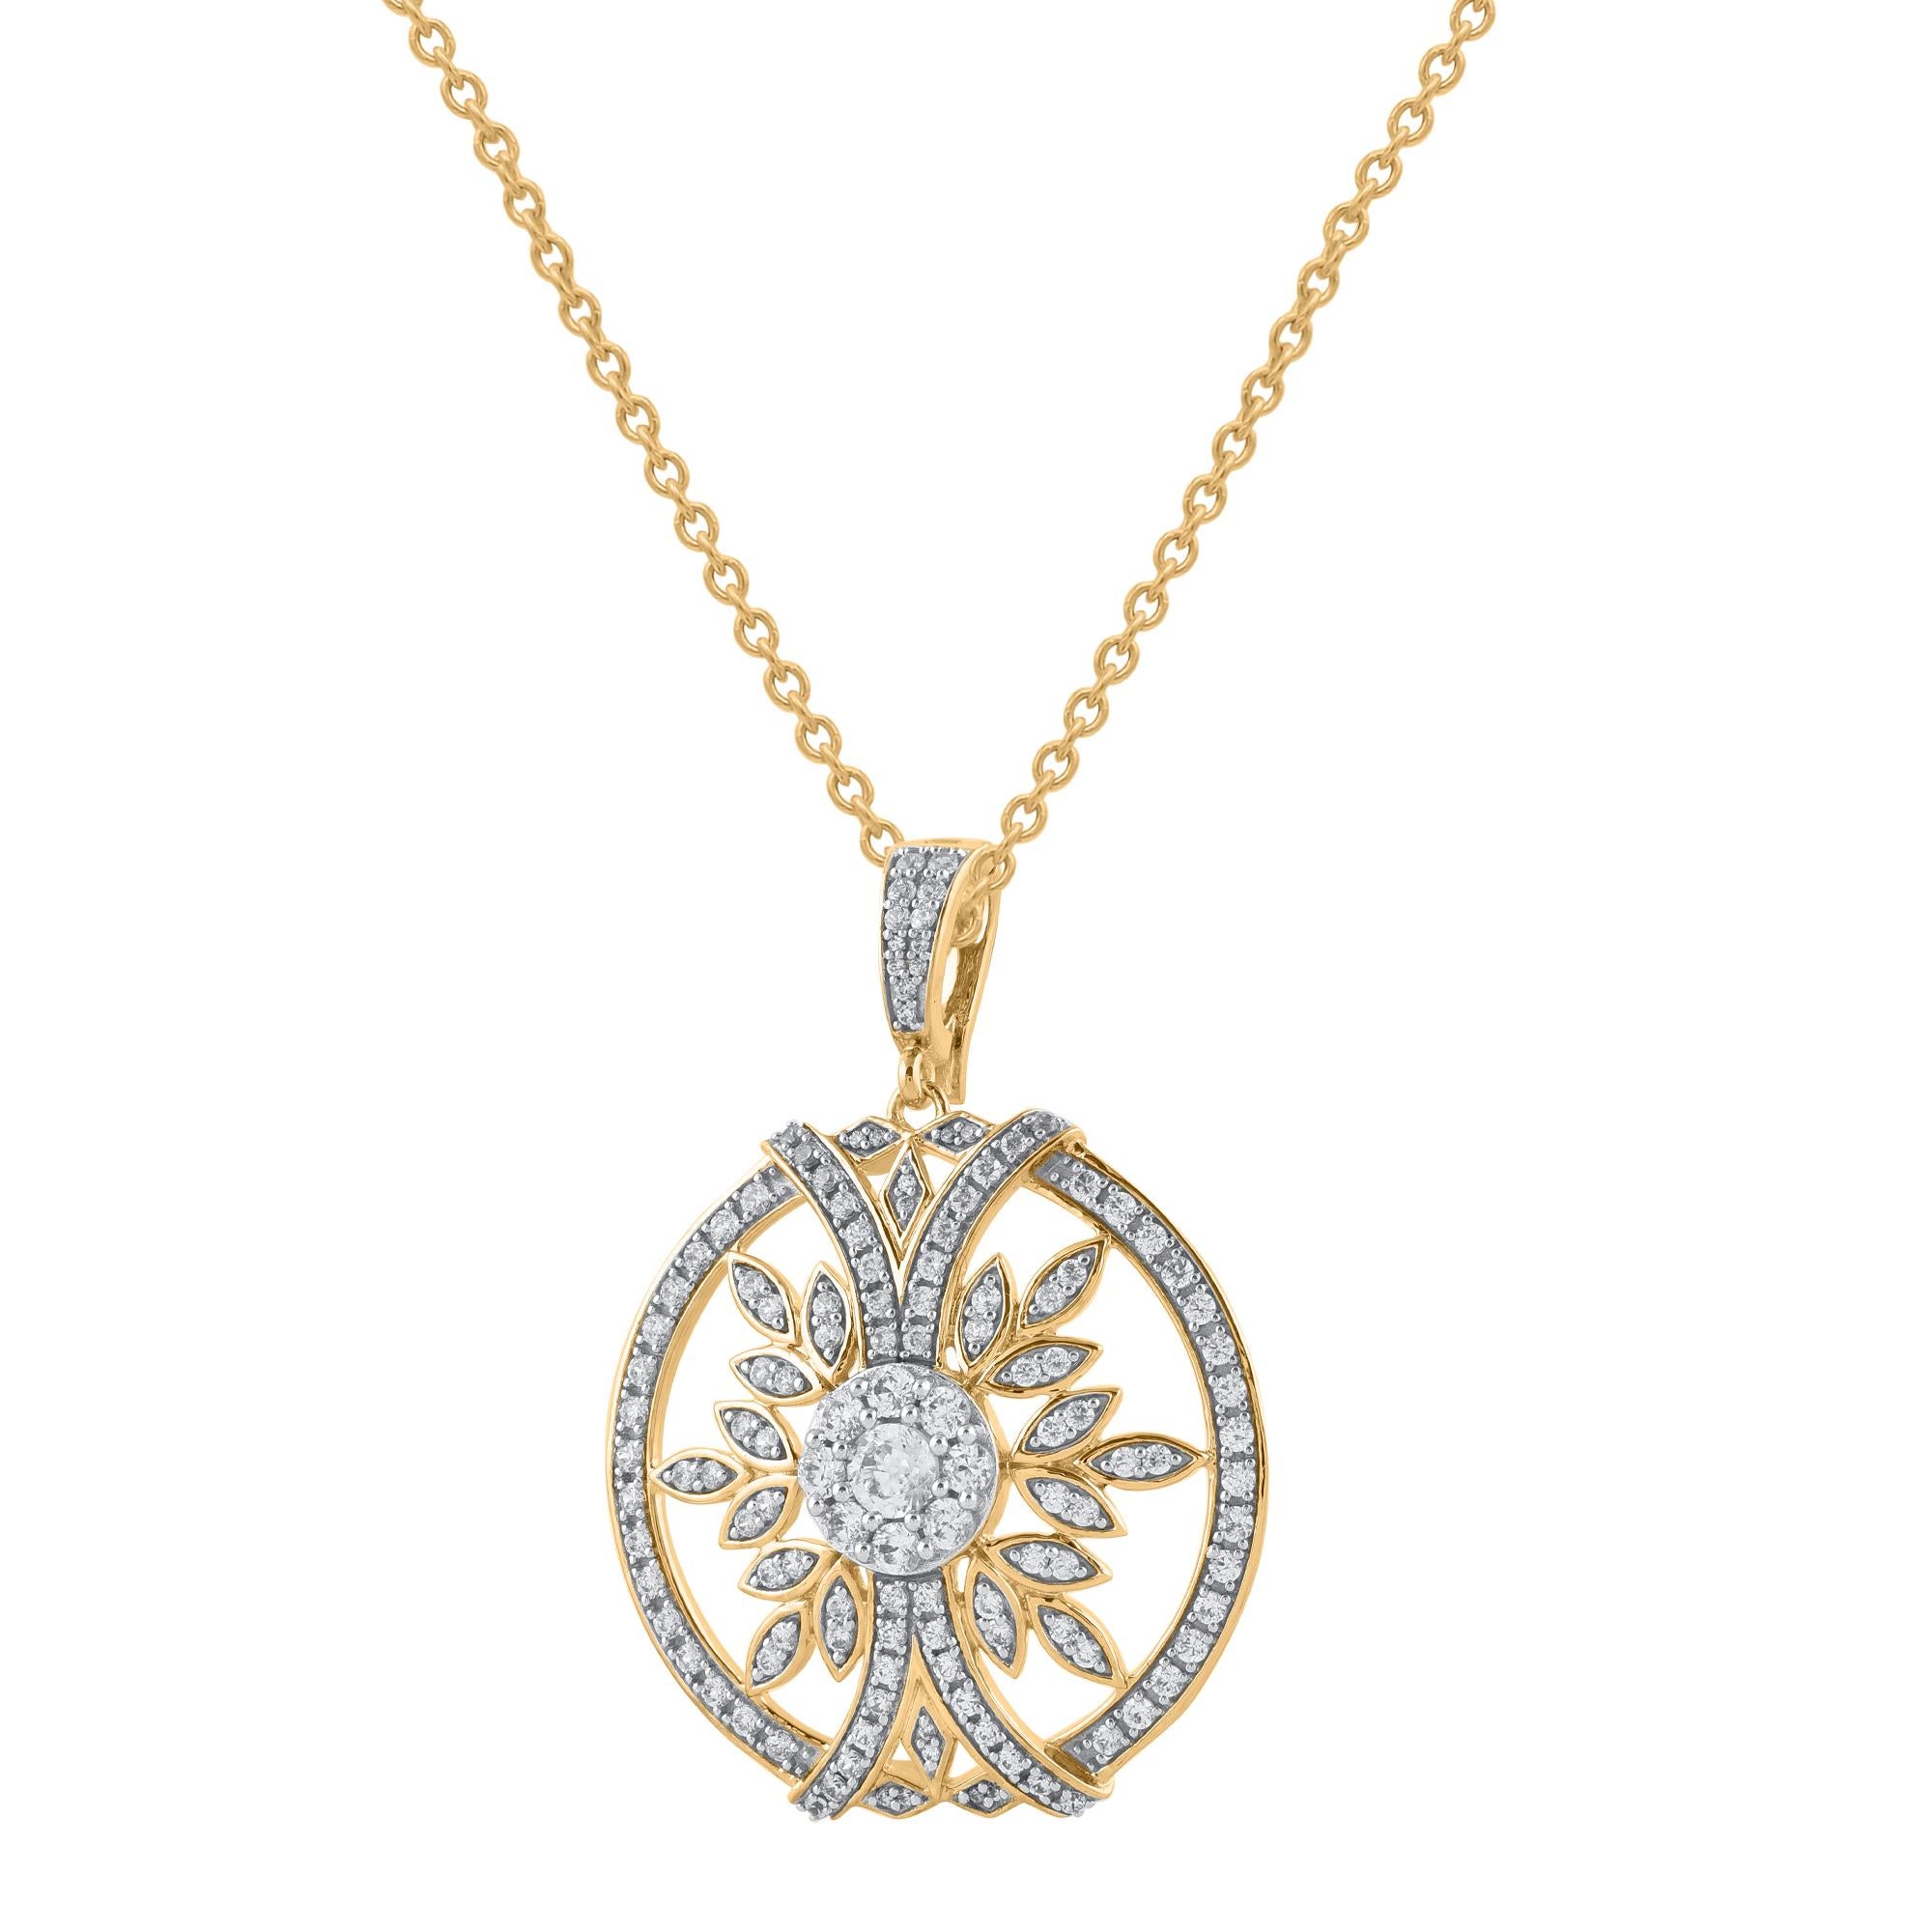 Raise the fashion bar with this stunning diamond pendant. This timeless design created in 14kt yellow gold, this circle cluster leaf pendant features 133 brilliant cut & single cut diamonds in prong and pave settings. Diamonds are graded as H-I